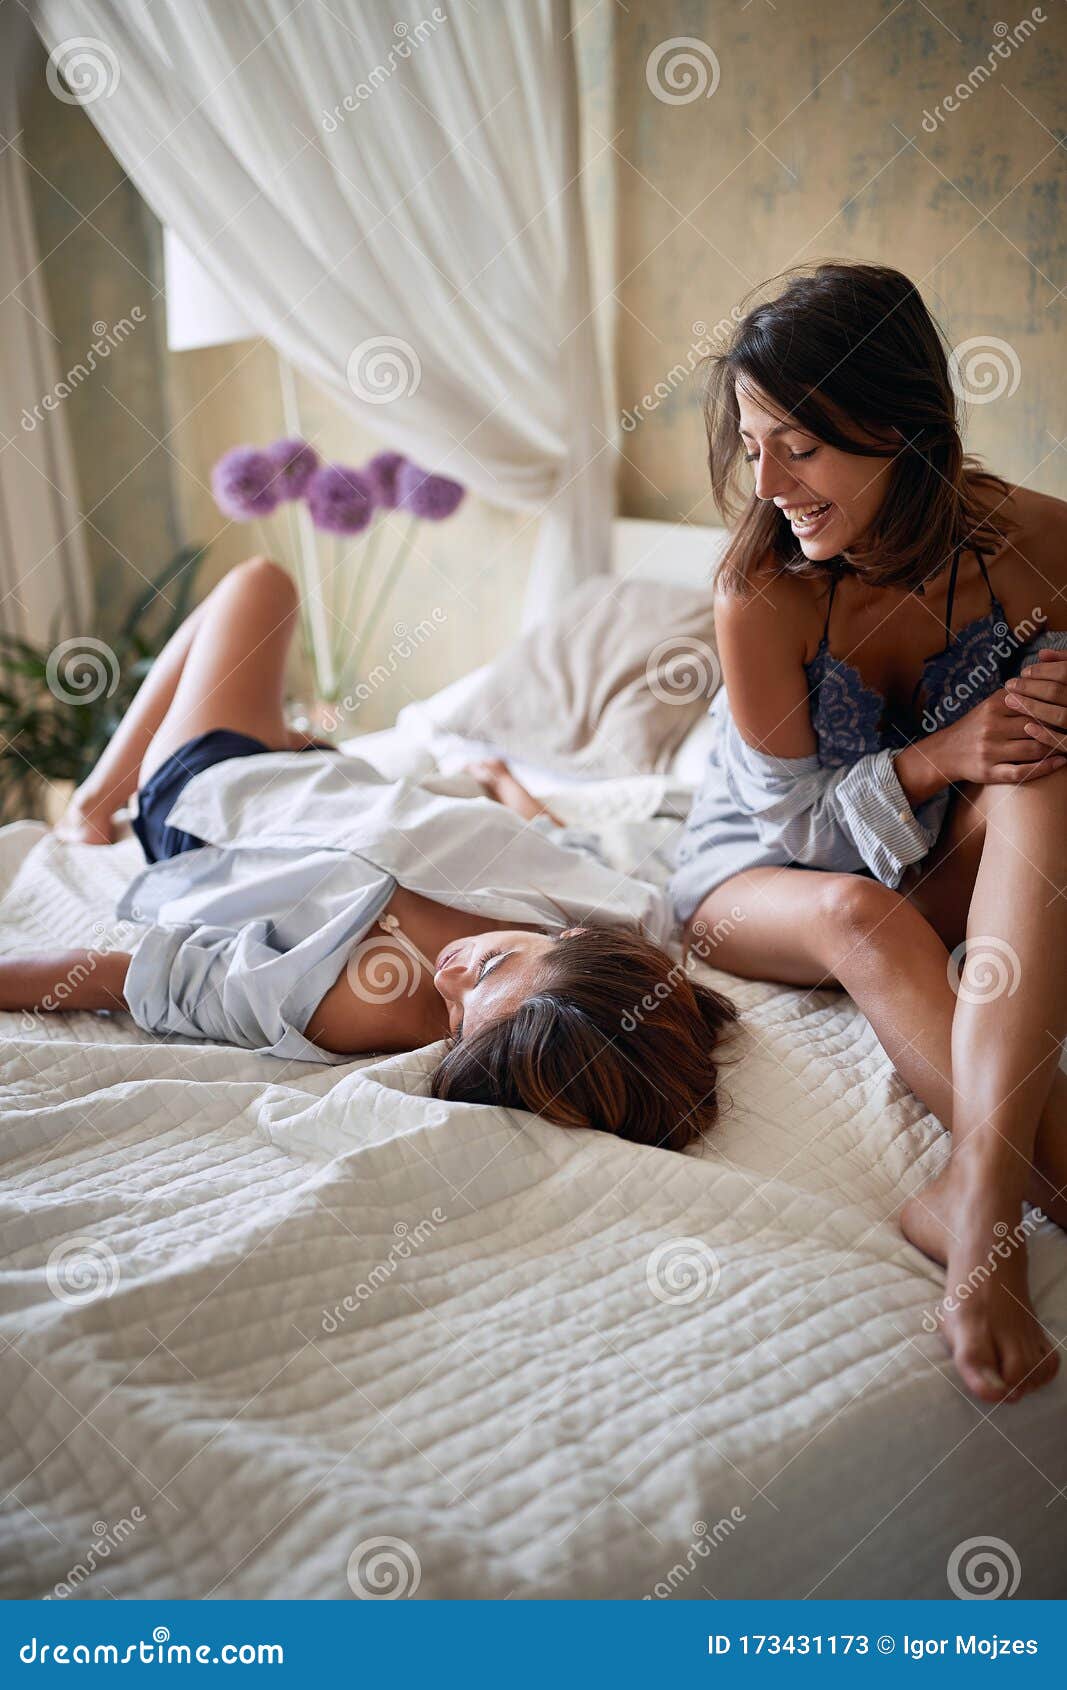 agbuya recommends lesbian friends in bed pic